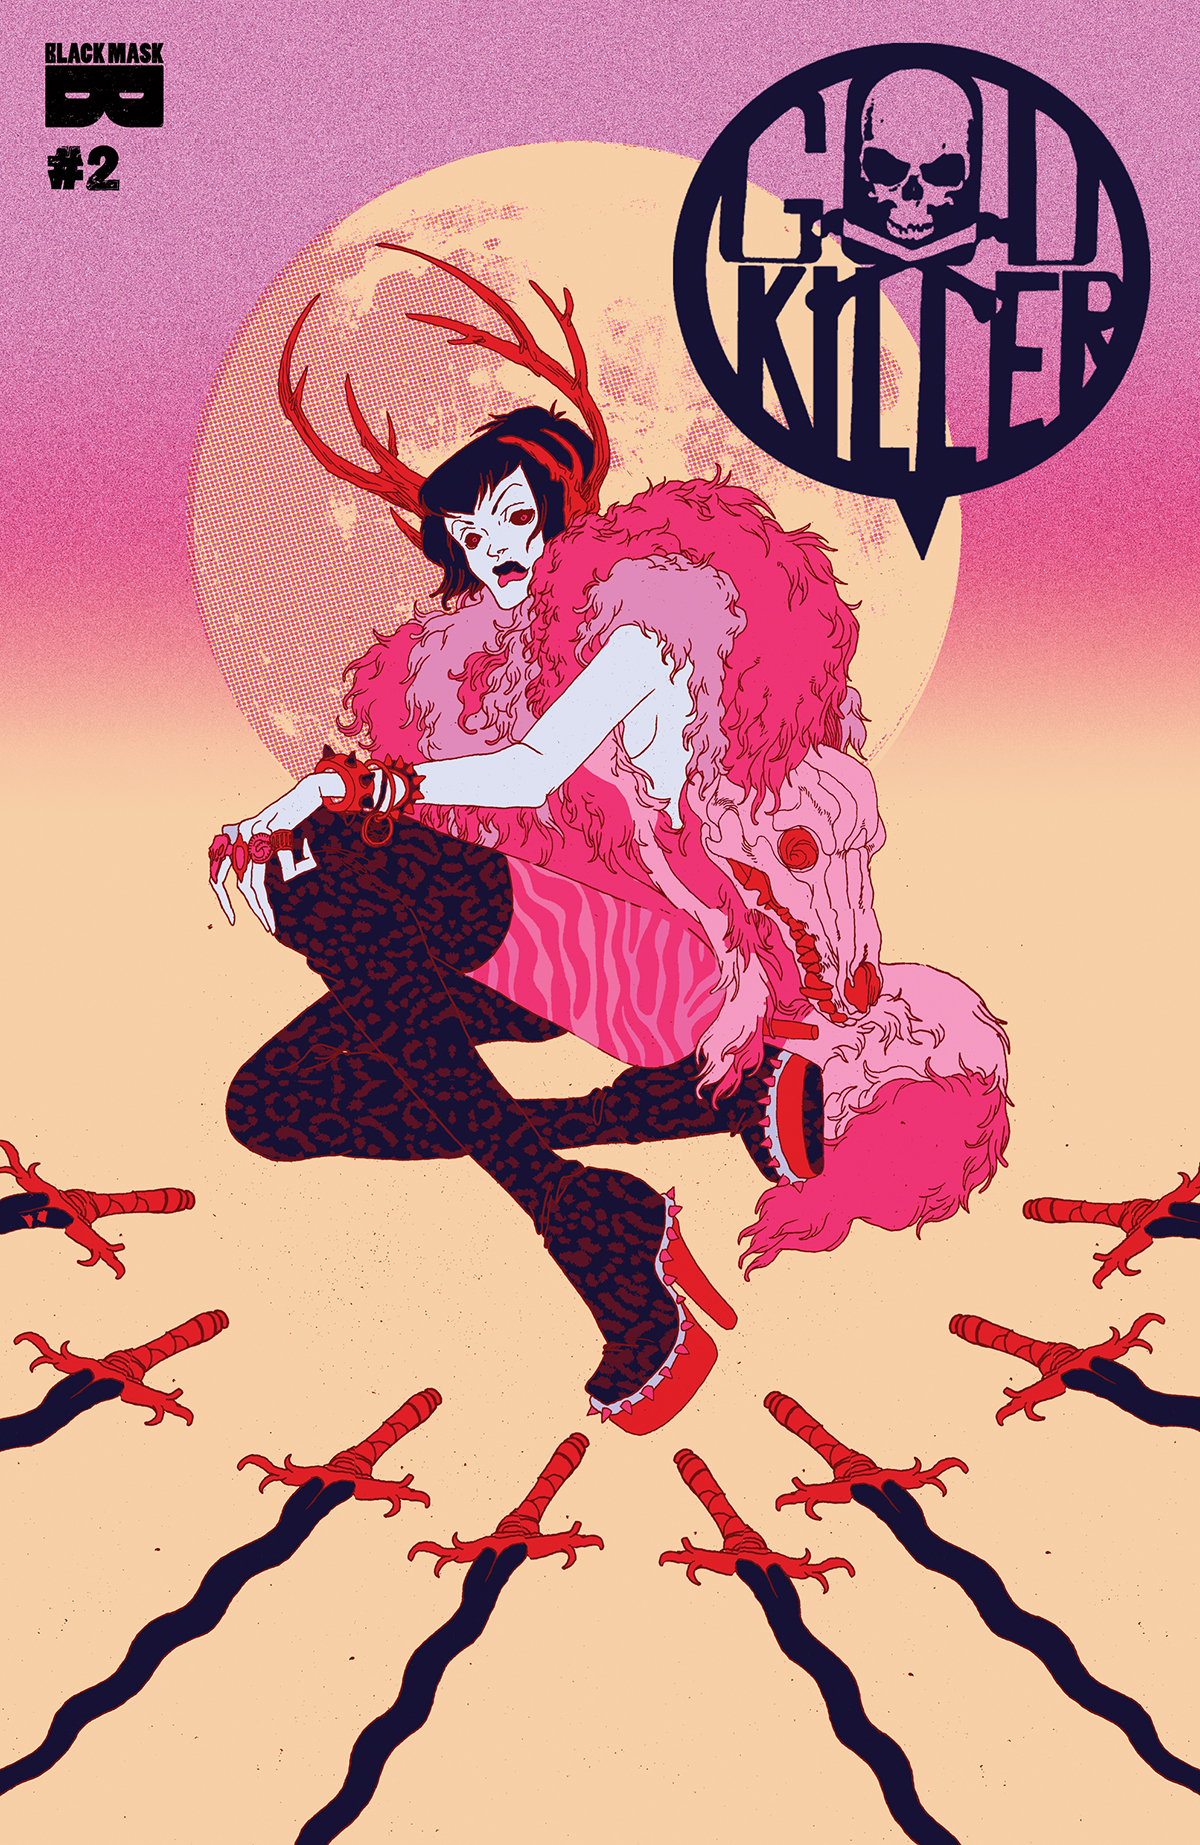 Godkiller Tomorrows Ashes #2 Cover A Wieszcyk (Mature)